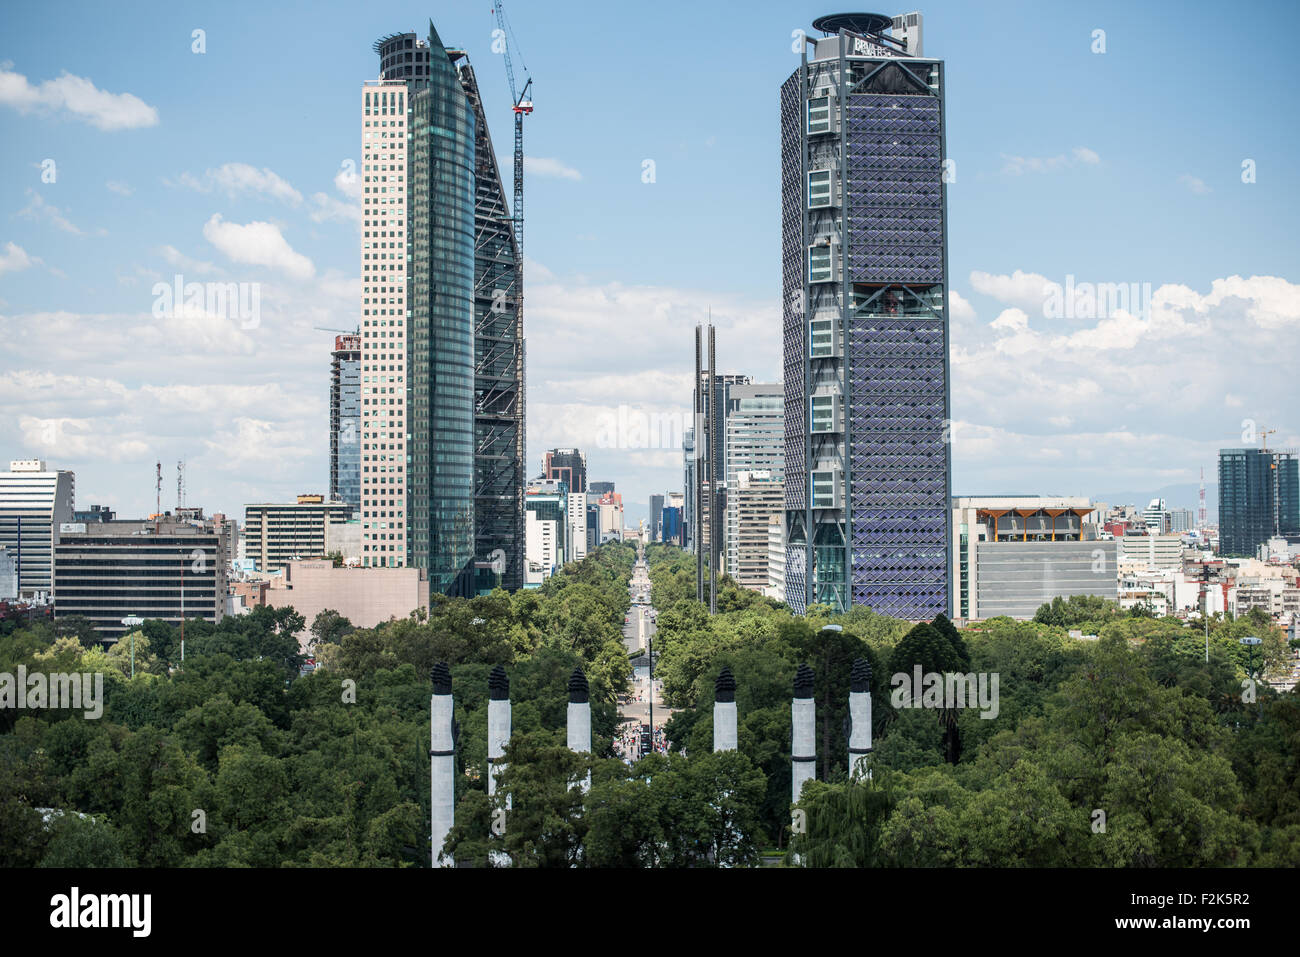 MEXICO City, Mexico - The view down Paseo de la Reforma, with new skyscrapers, from an outdoor patio area at Chapultepec Castle. Since construction first started around 1785, Chapultepec Castle has been a Military Academy, Imperial residence, Presidential home, observatory, and is now Mexico's National History Museum (Museo Nacional de Historia). It sits on top of Chapultepec Hill in the heart of Mexico City. Stock Photo